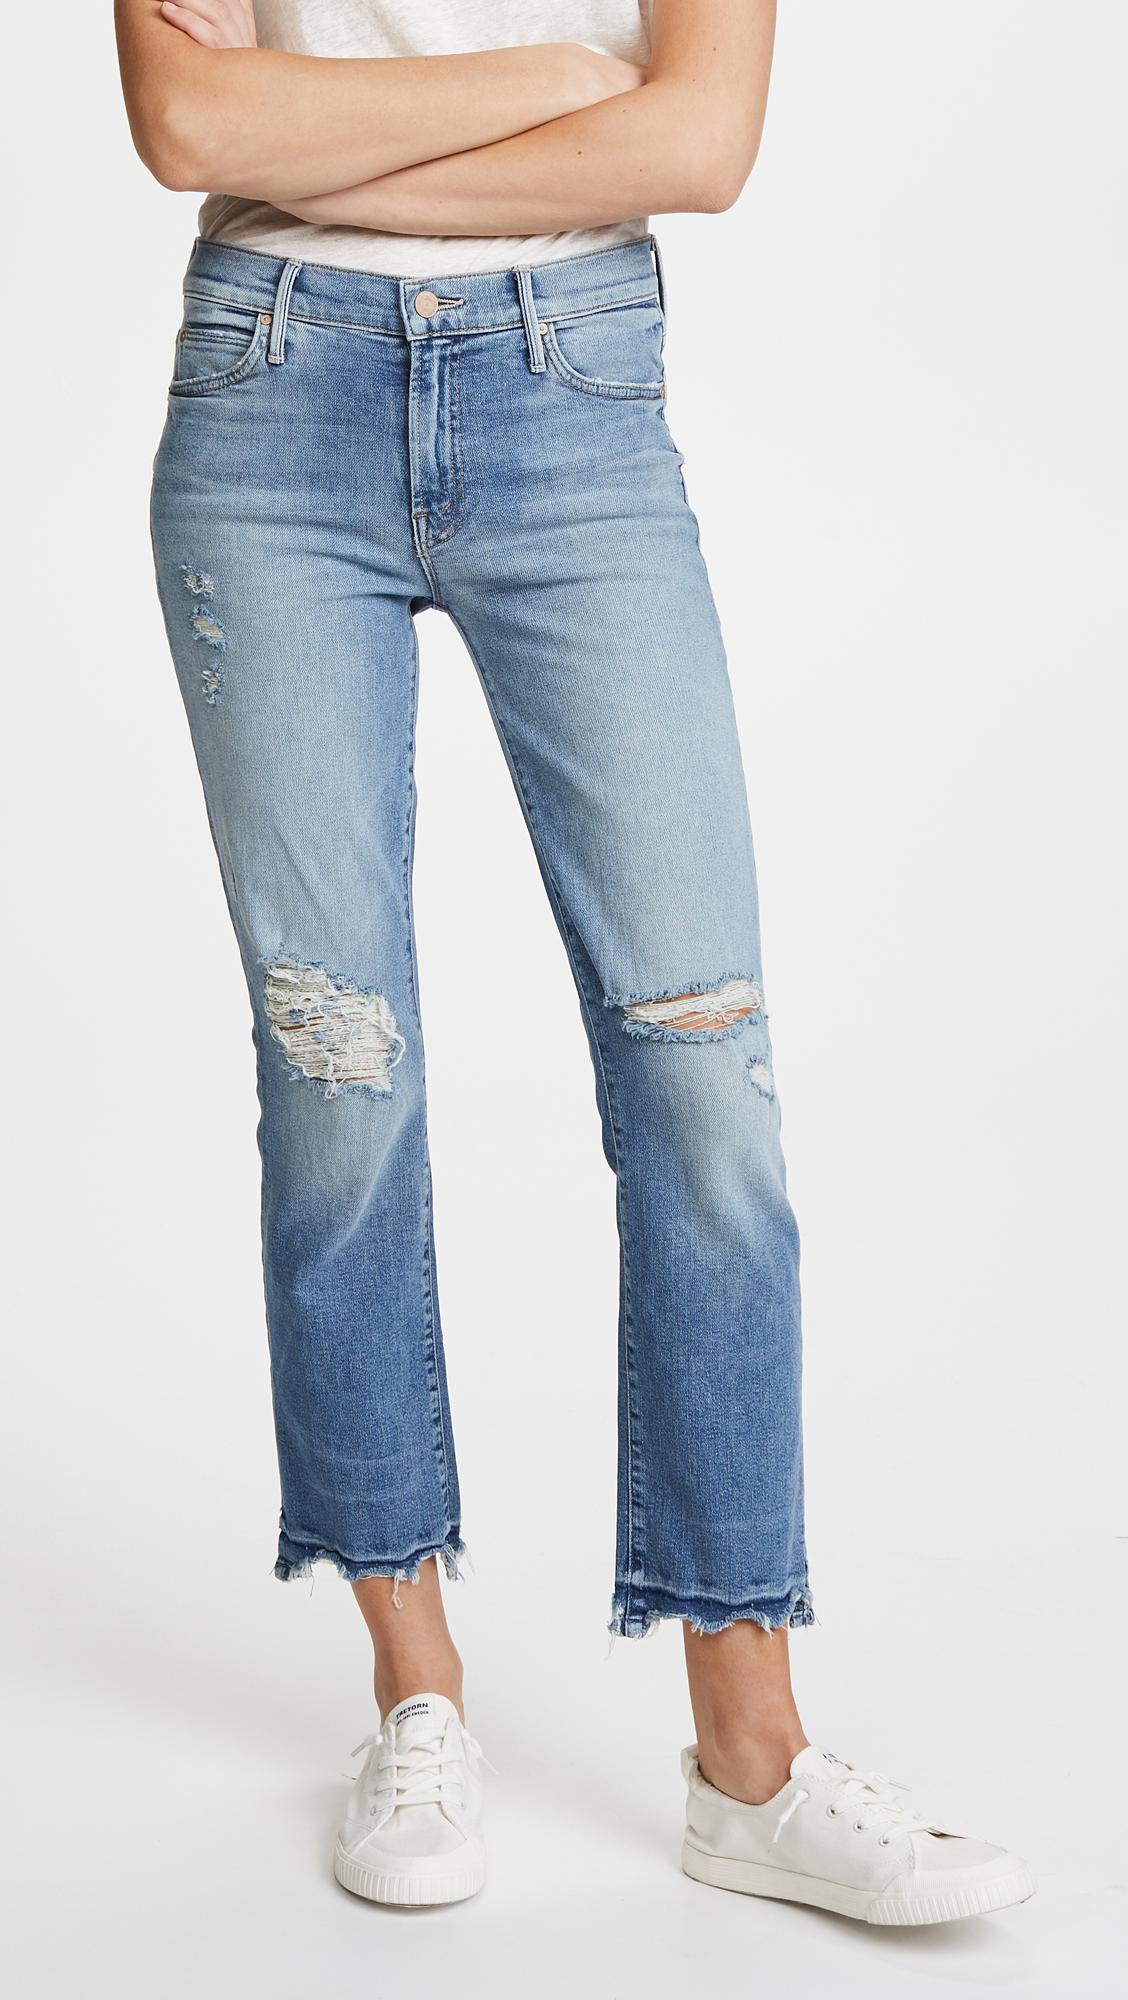 Lyst - Mother Rascal Snippet Jeans in Blue